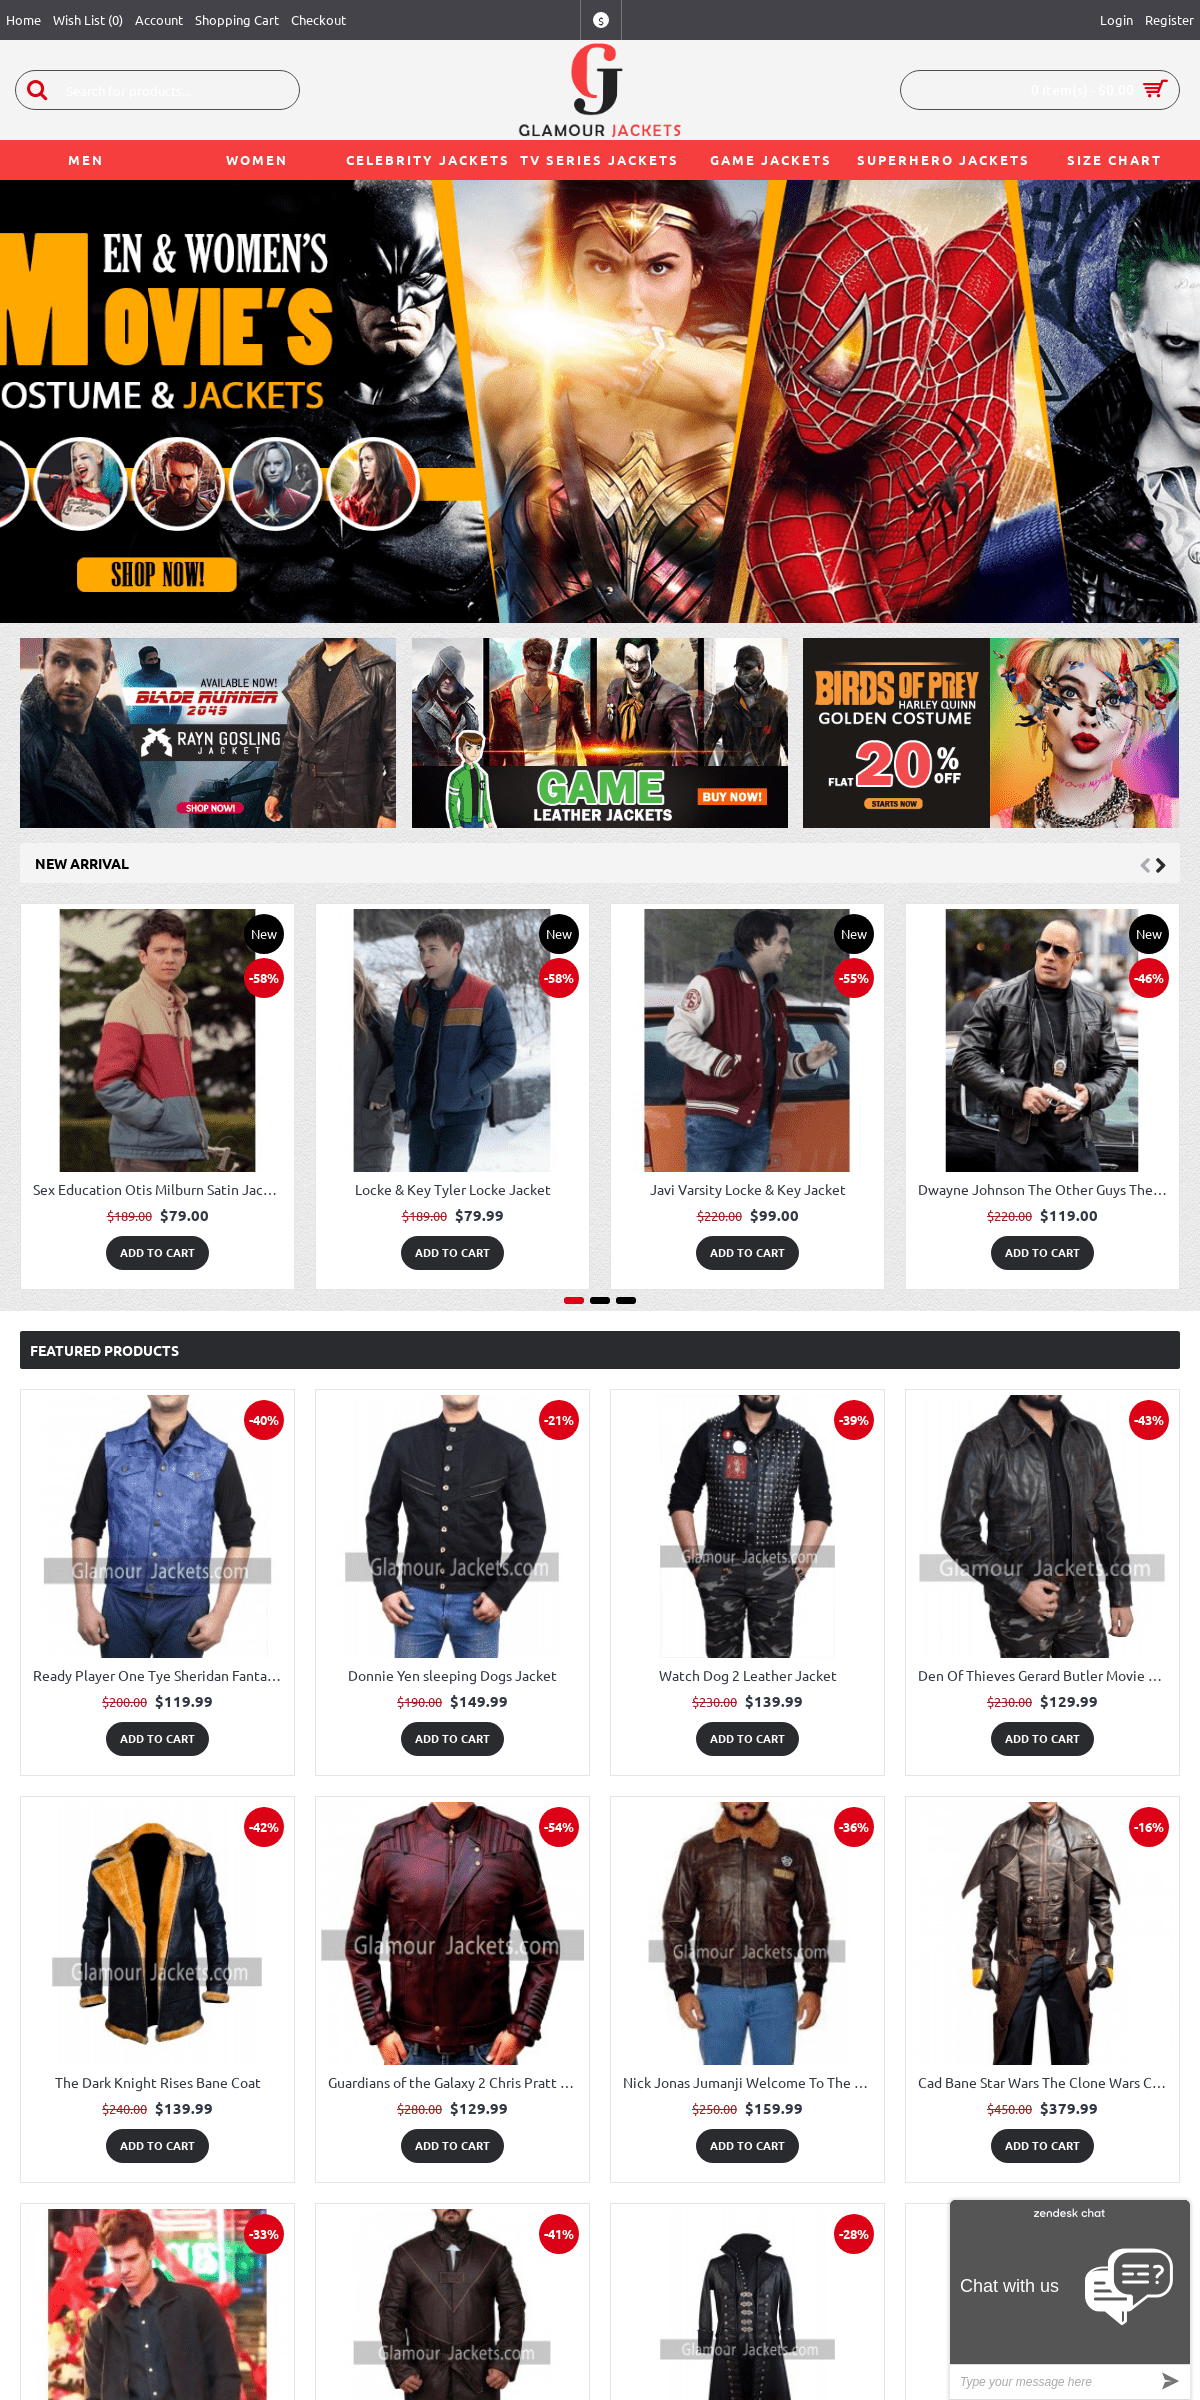 A complete backup of glamourjackets.com